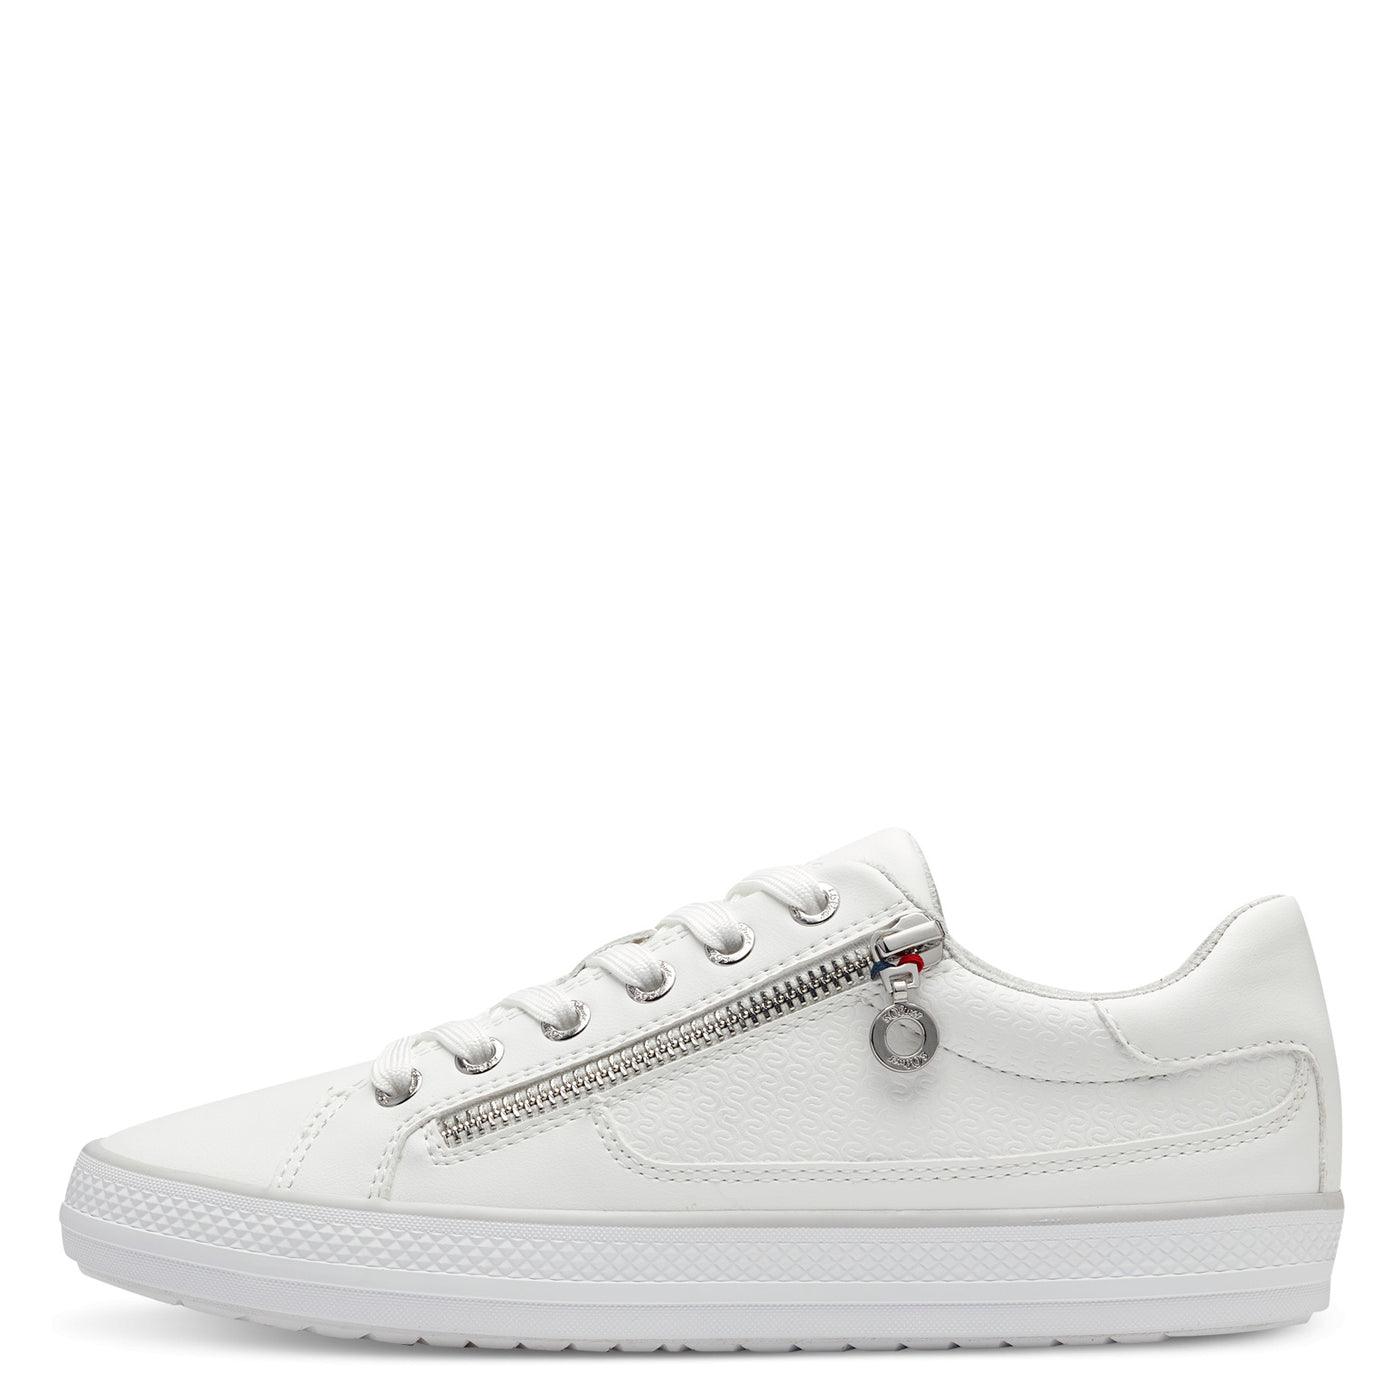 S'OLIVER - 23615-100 FLAT ZIP/LACE TRAINER - WHITE